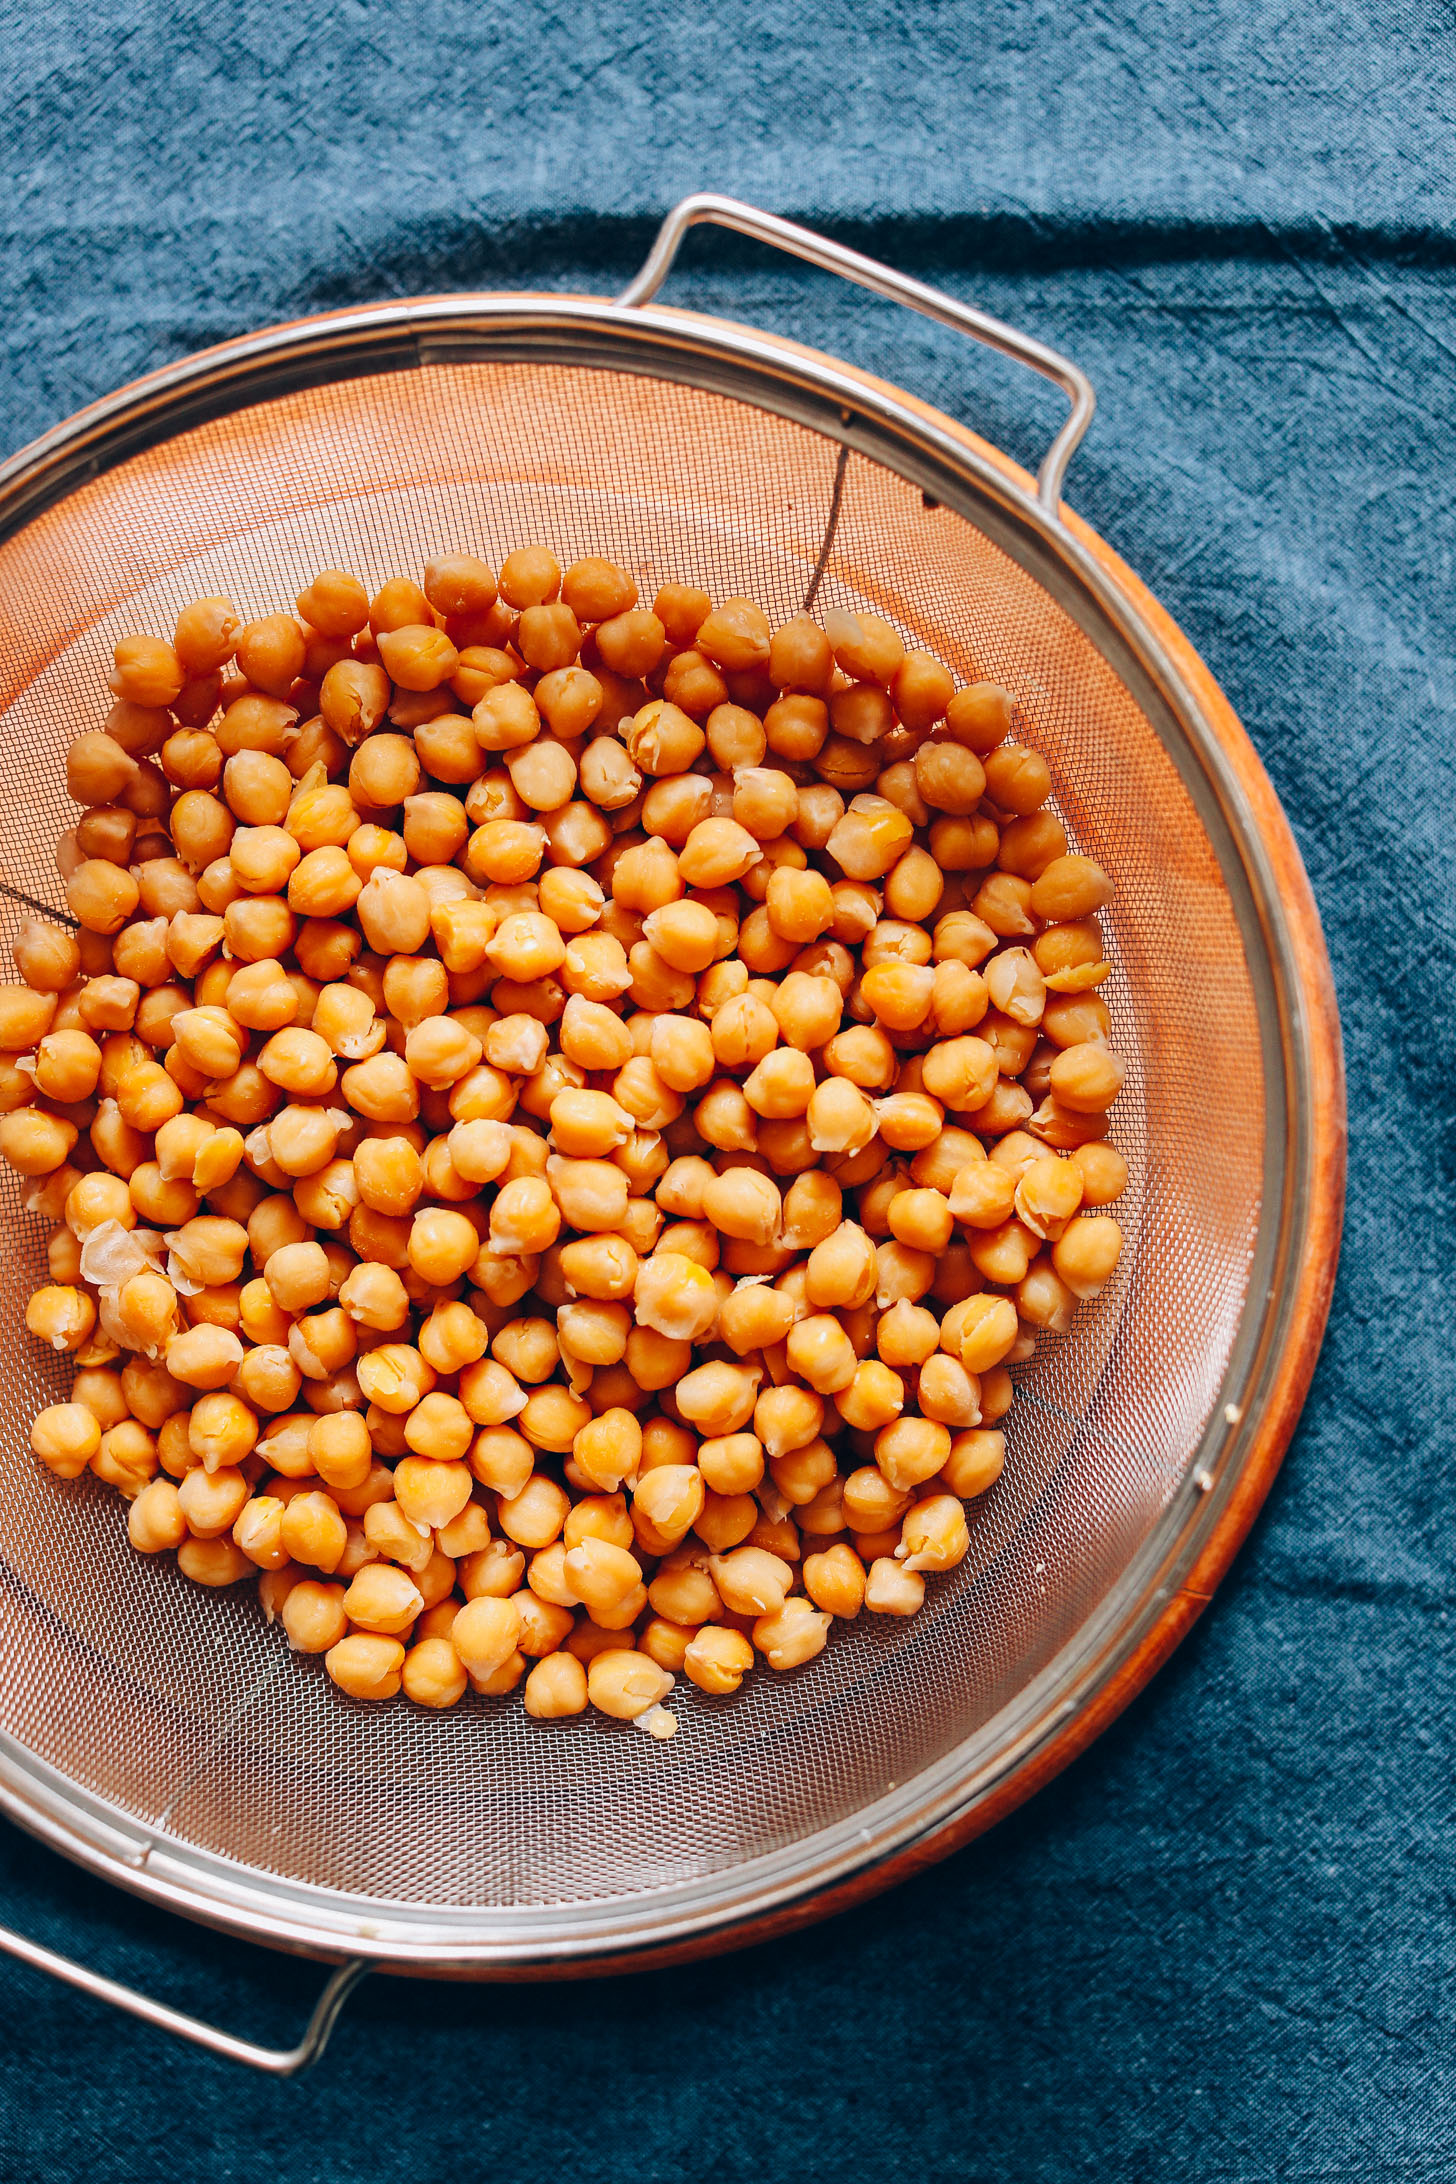 Draining chickpeas to make homemade hummus for a protein-packed vegan snack